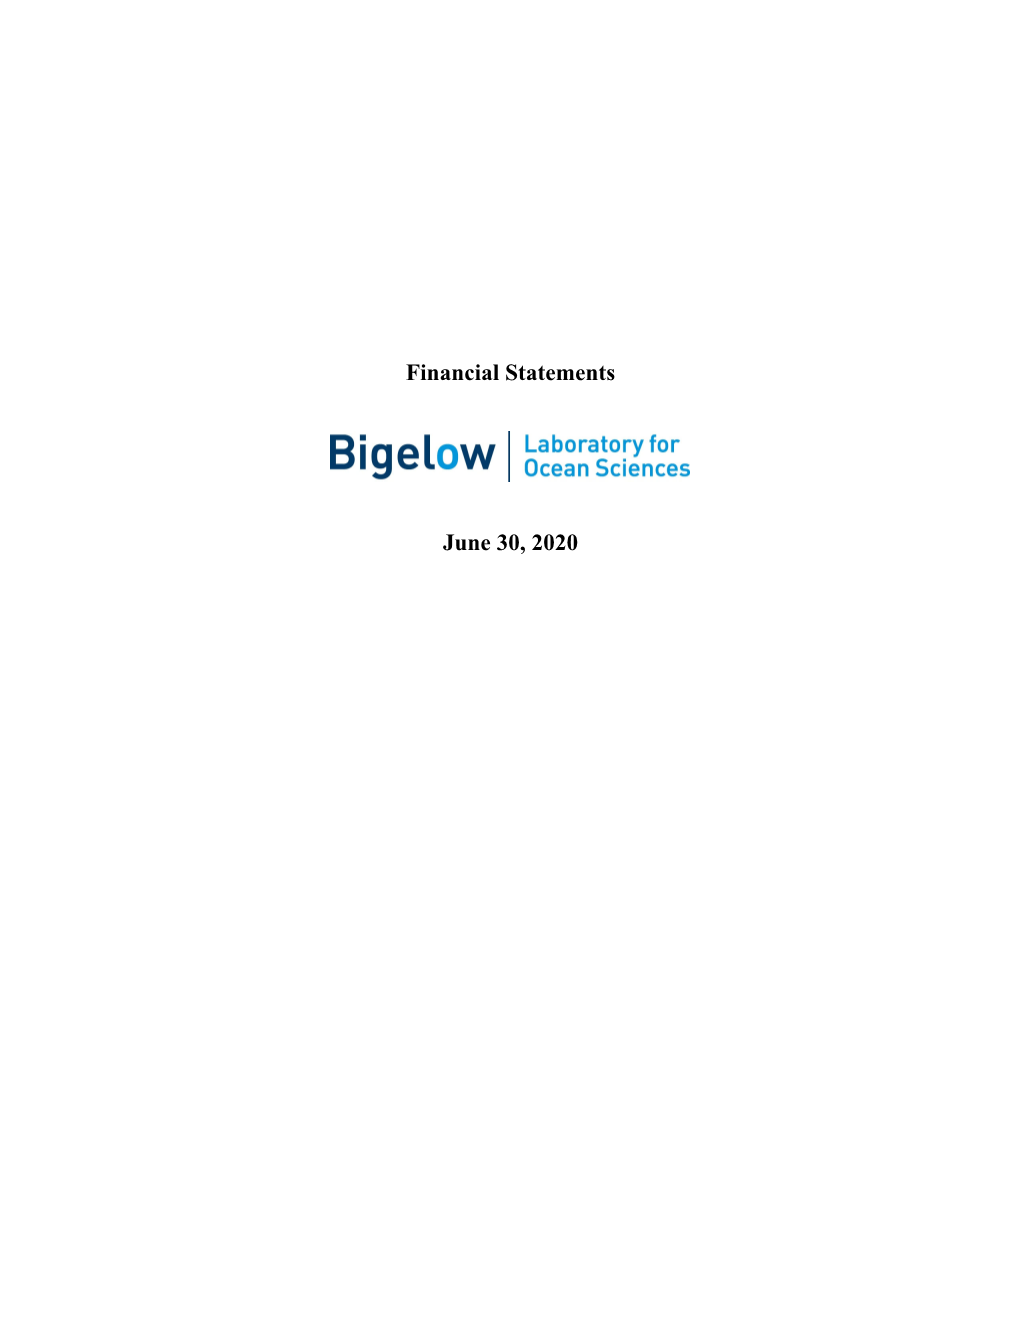 Financial Statements and Federal Reporting Contents Bigelow Laboratory for Ocean Sciences June 30, 2020